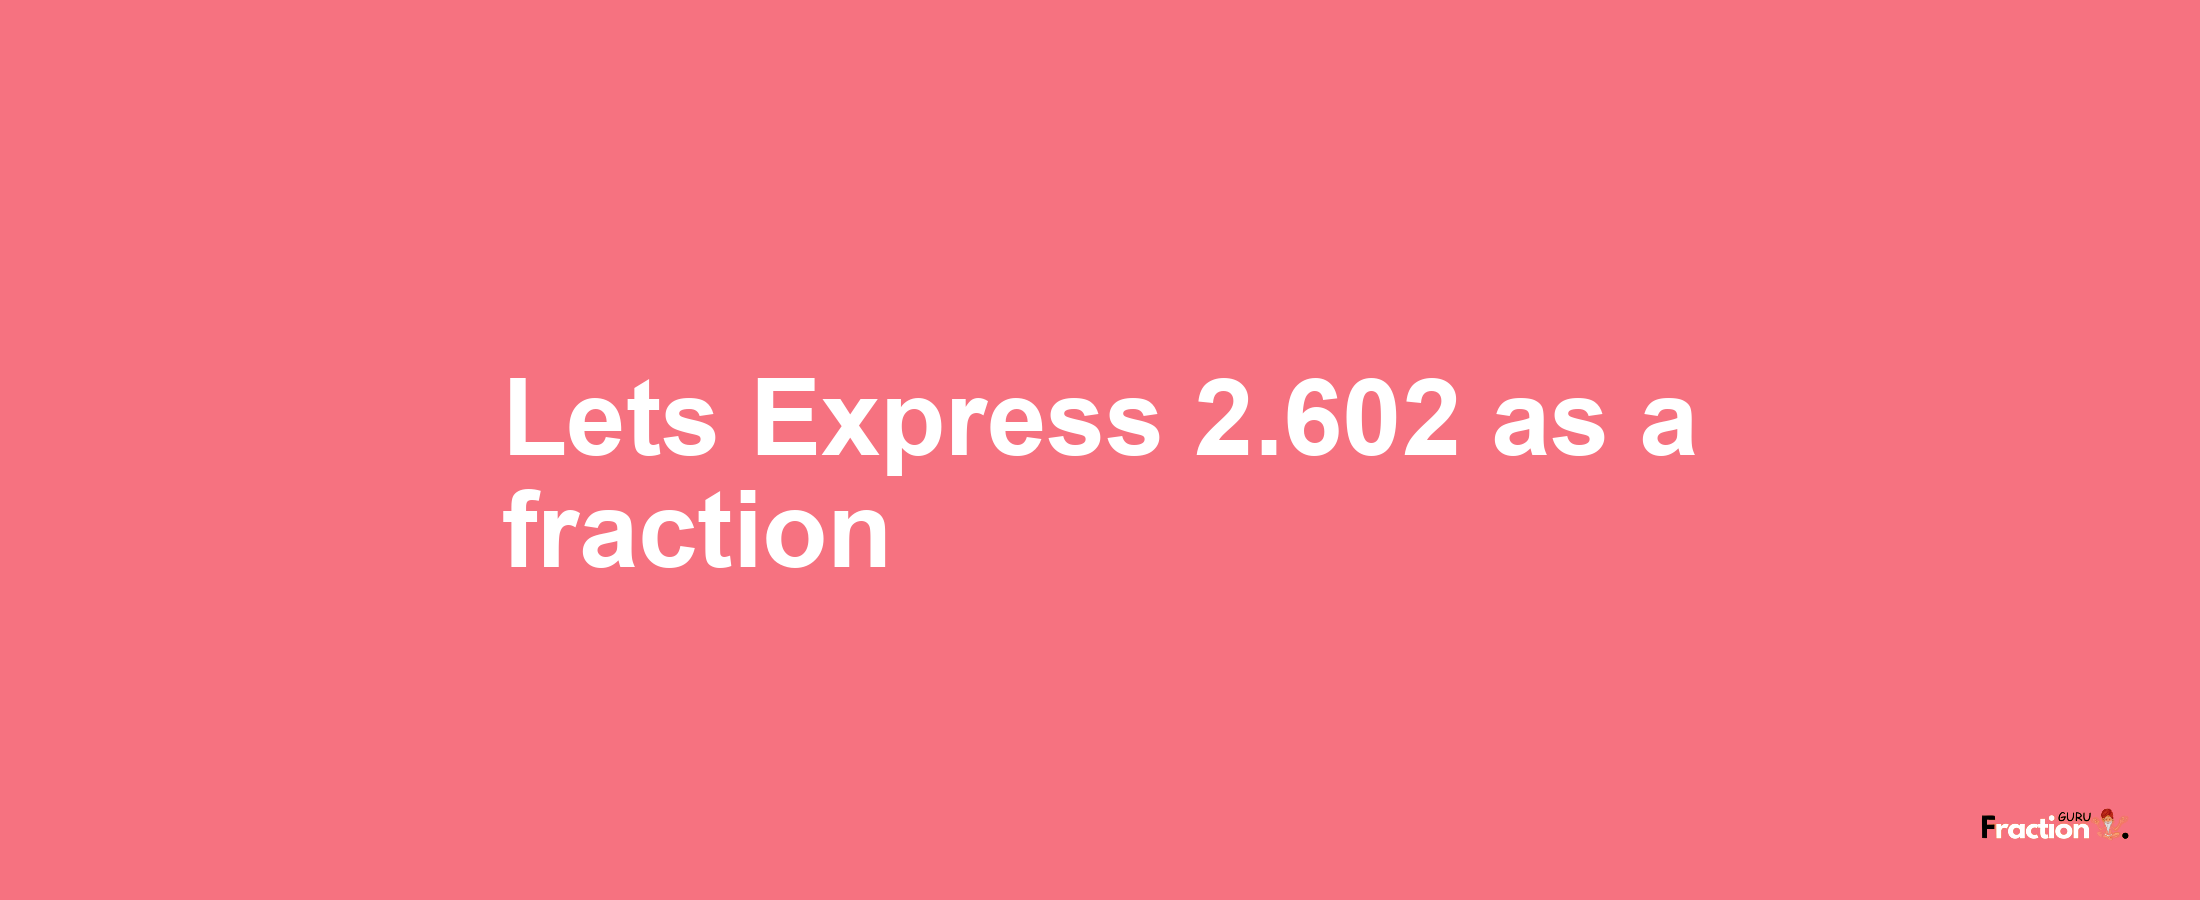 Lets Express 2.602 as afraction